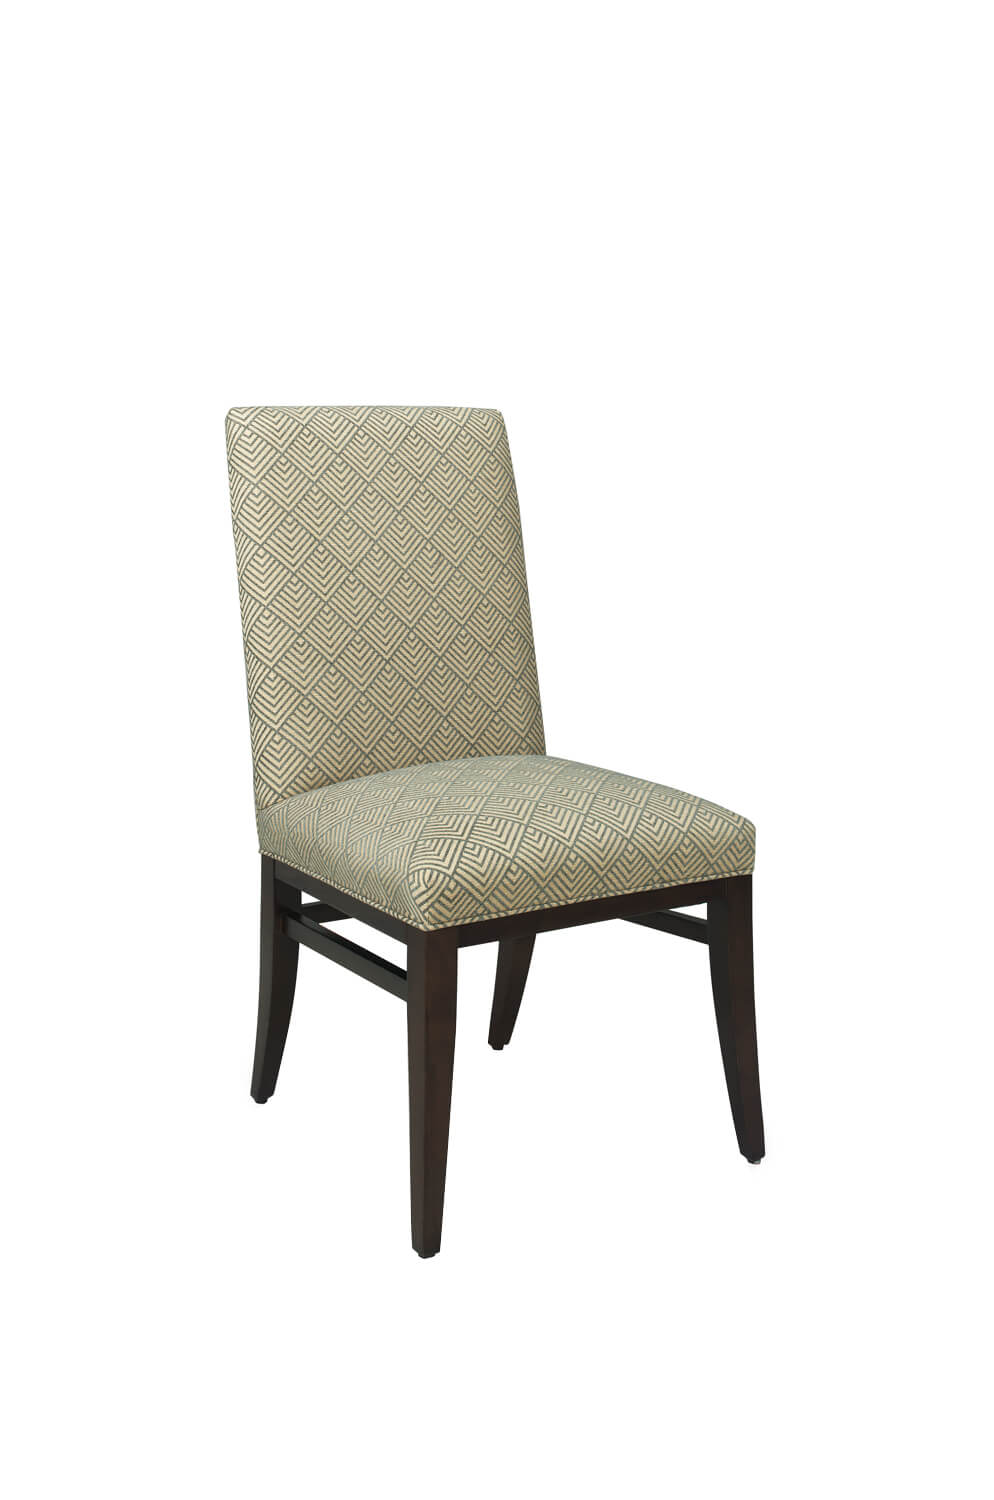 #1201 Modern Upholstered Wood Dining Chair